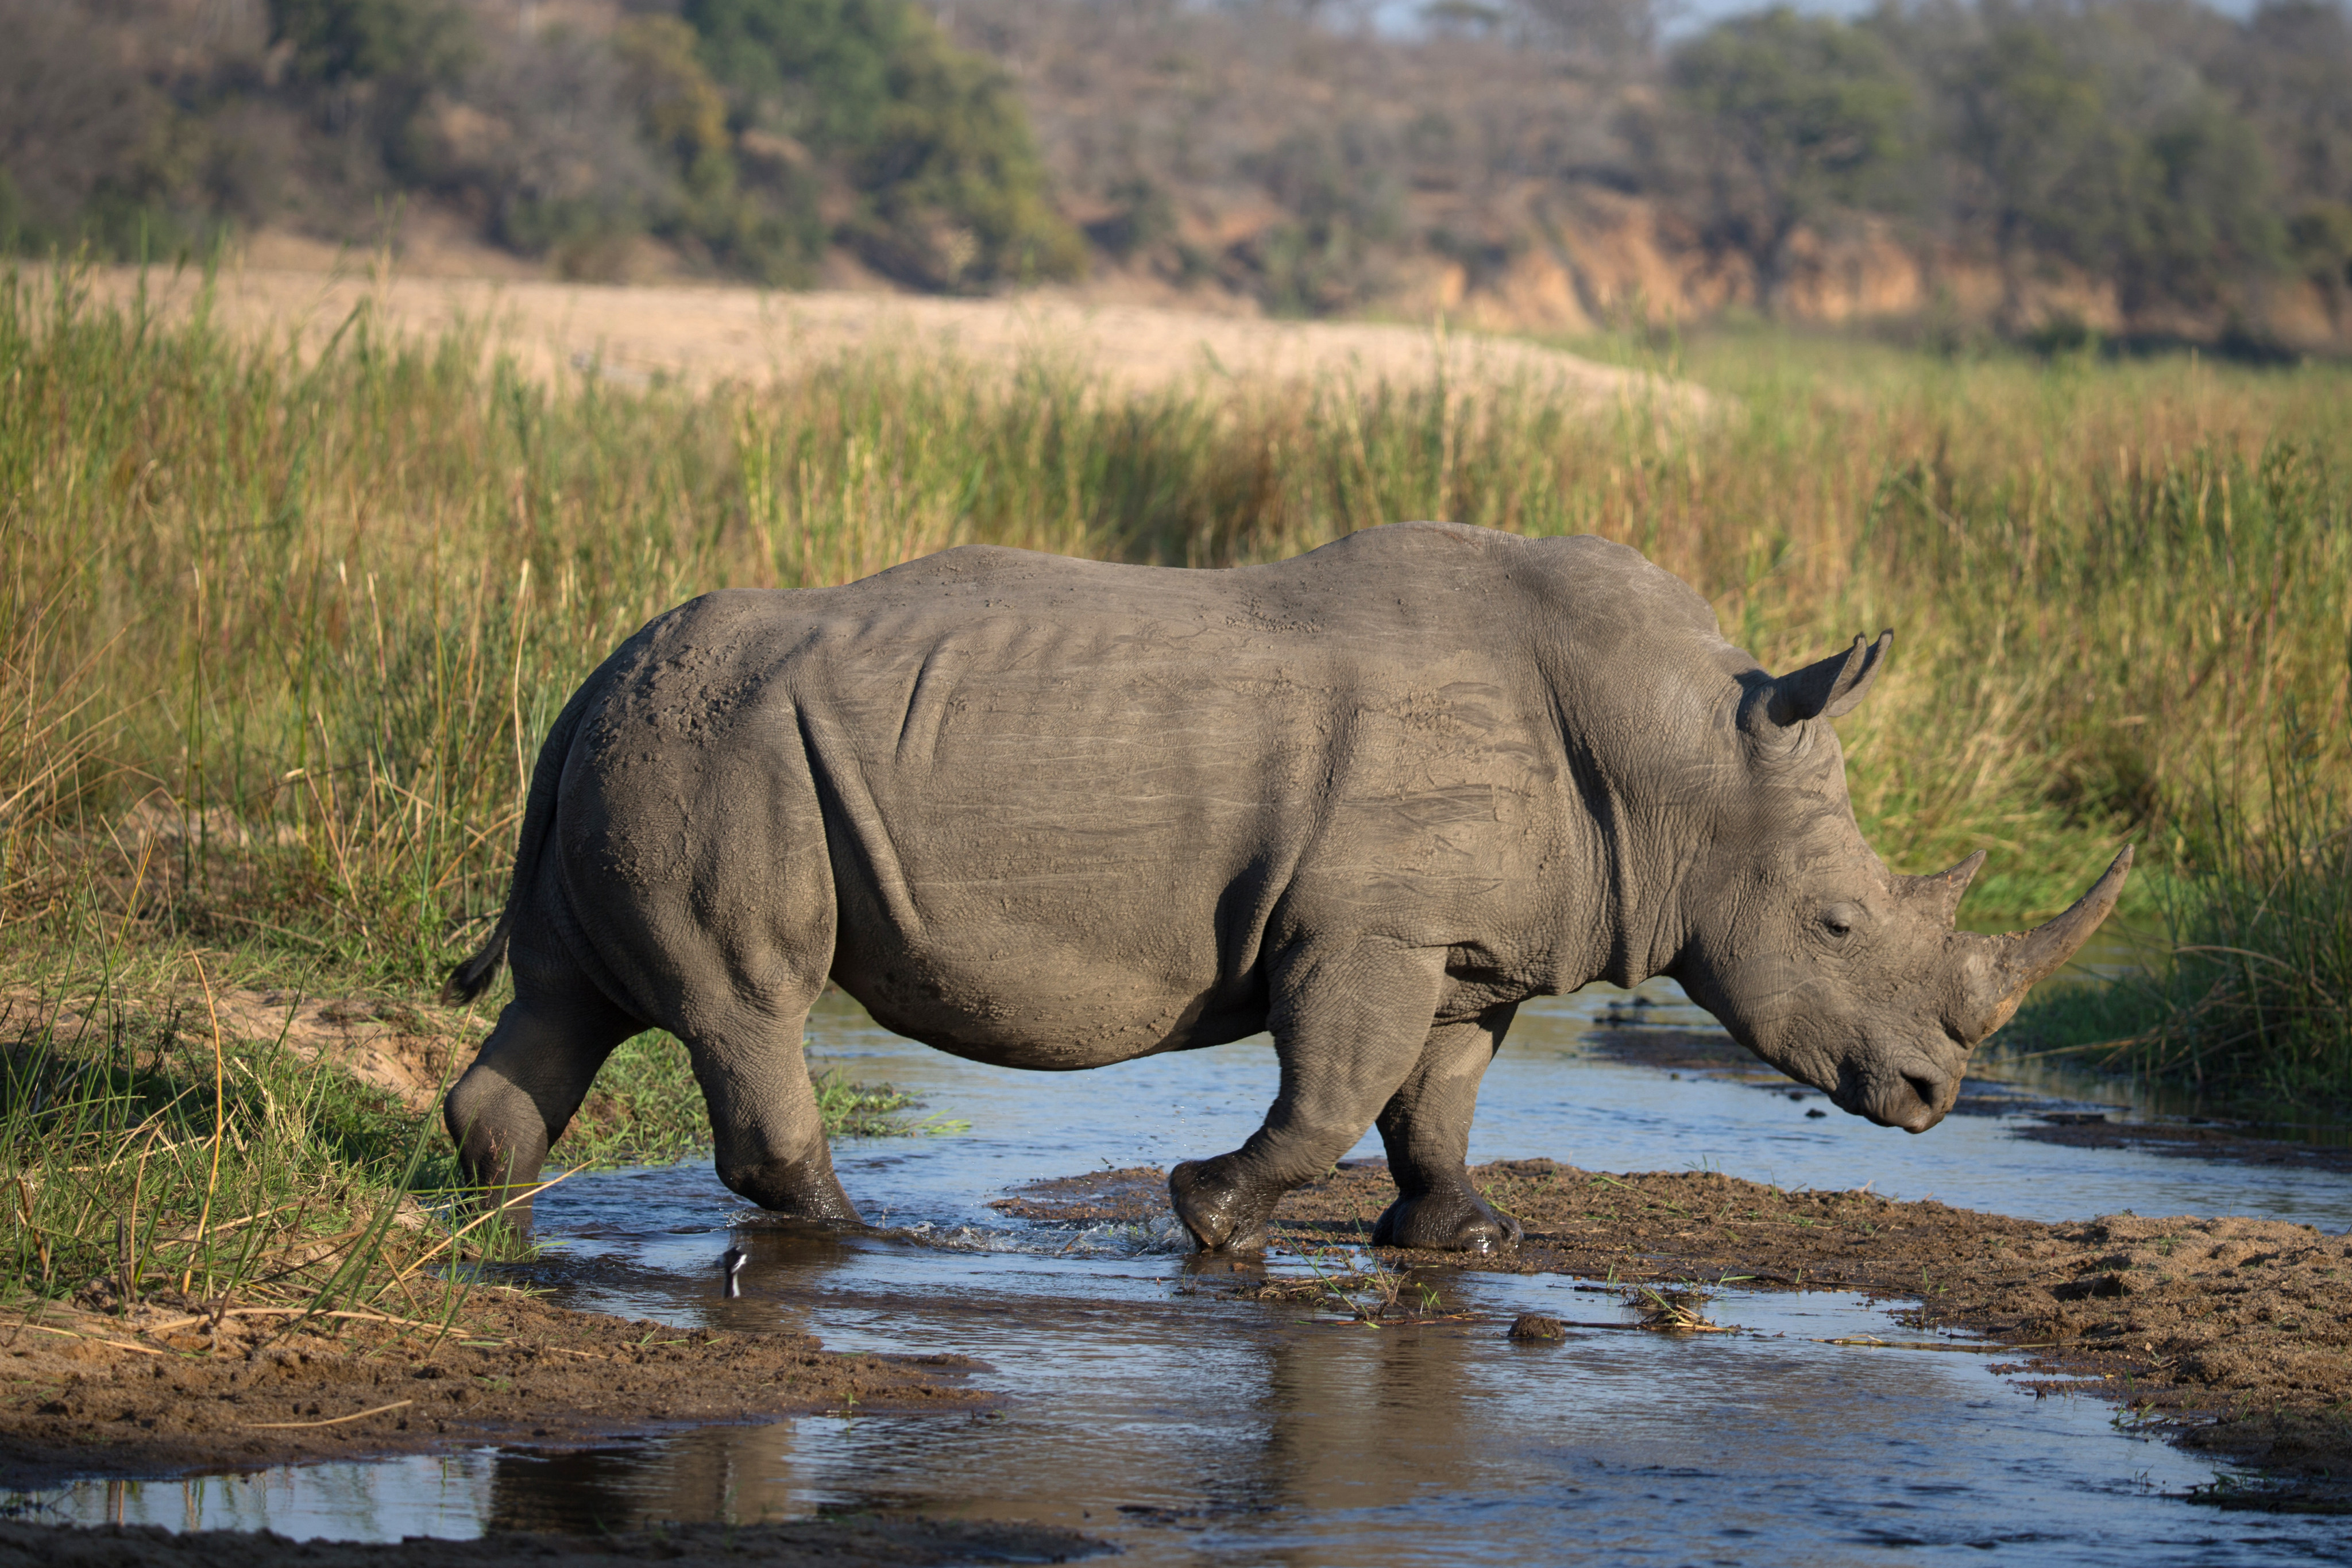 China’s three growing “grey rhinos” are threatening its economy. Photo: Godong/Universal Images Group via Getty Images